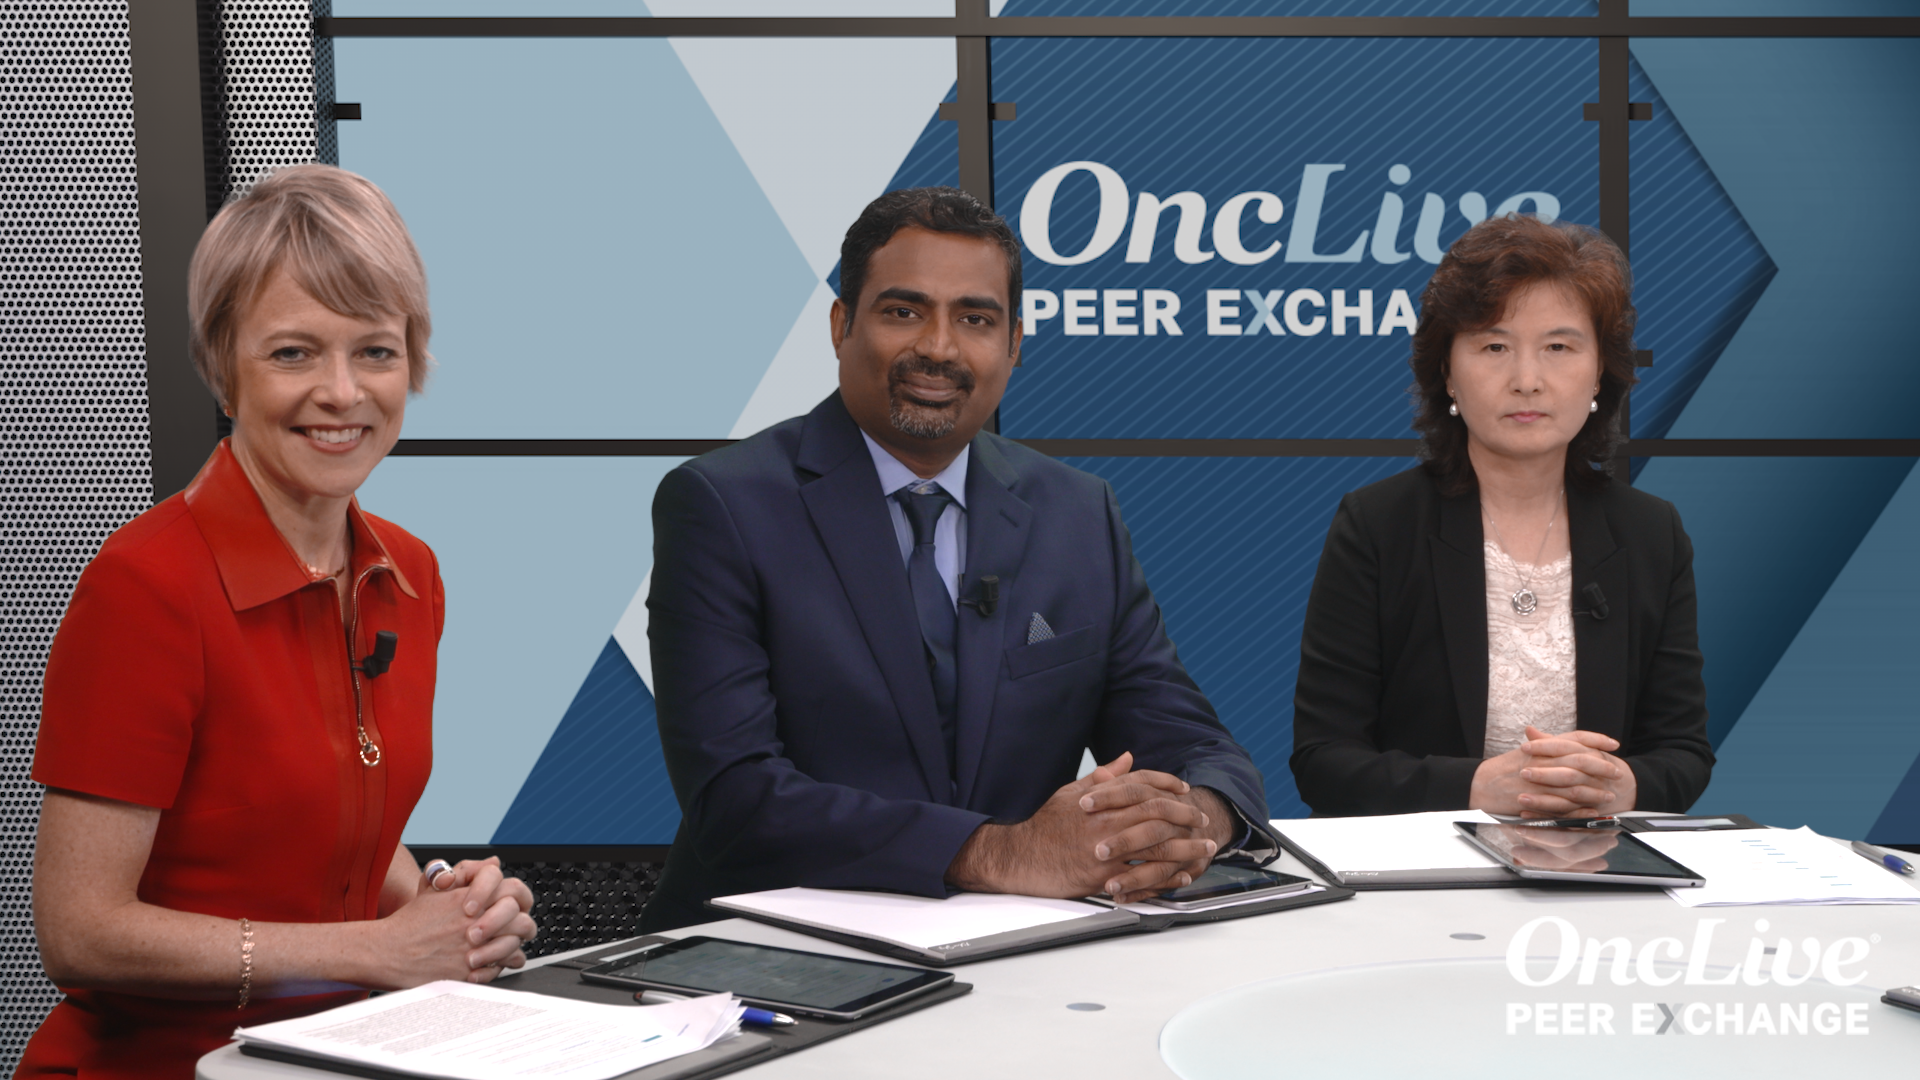 The ARC-7 Trial of Anti-TGIT Immunotherapies in Advanced NSCLC